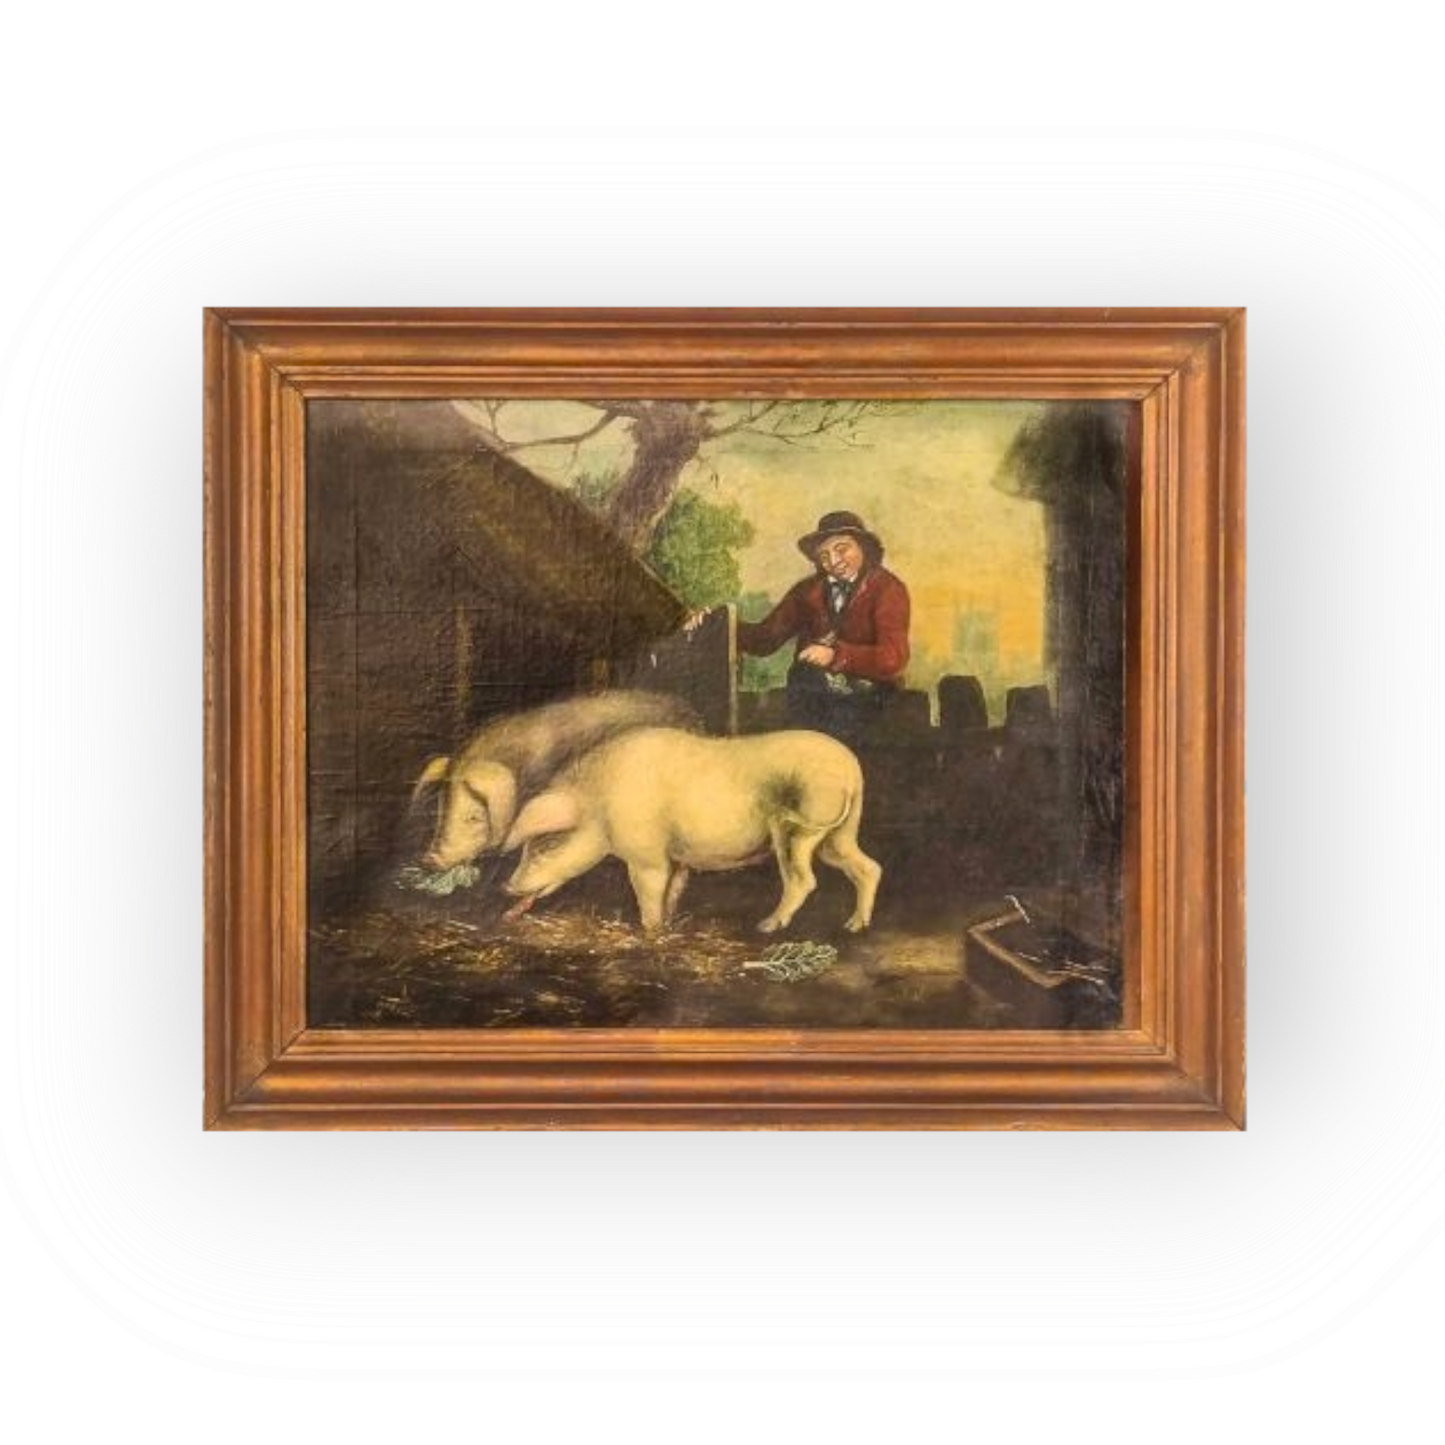 An Early 19th Century Primitive English School Antique Folk Art Oil on Canvas of Pigs in a Pigsty